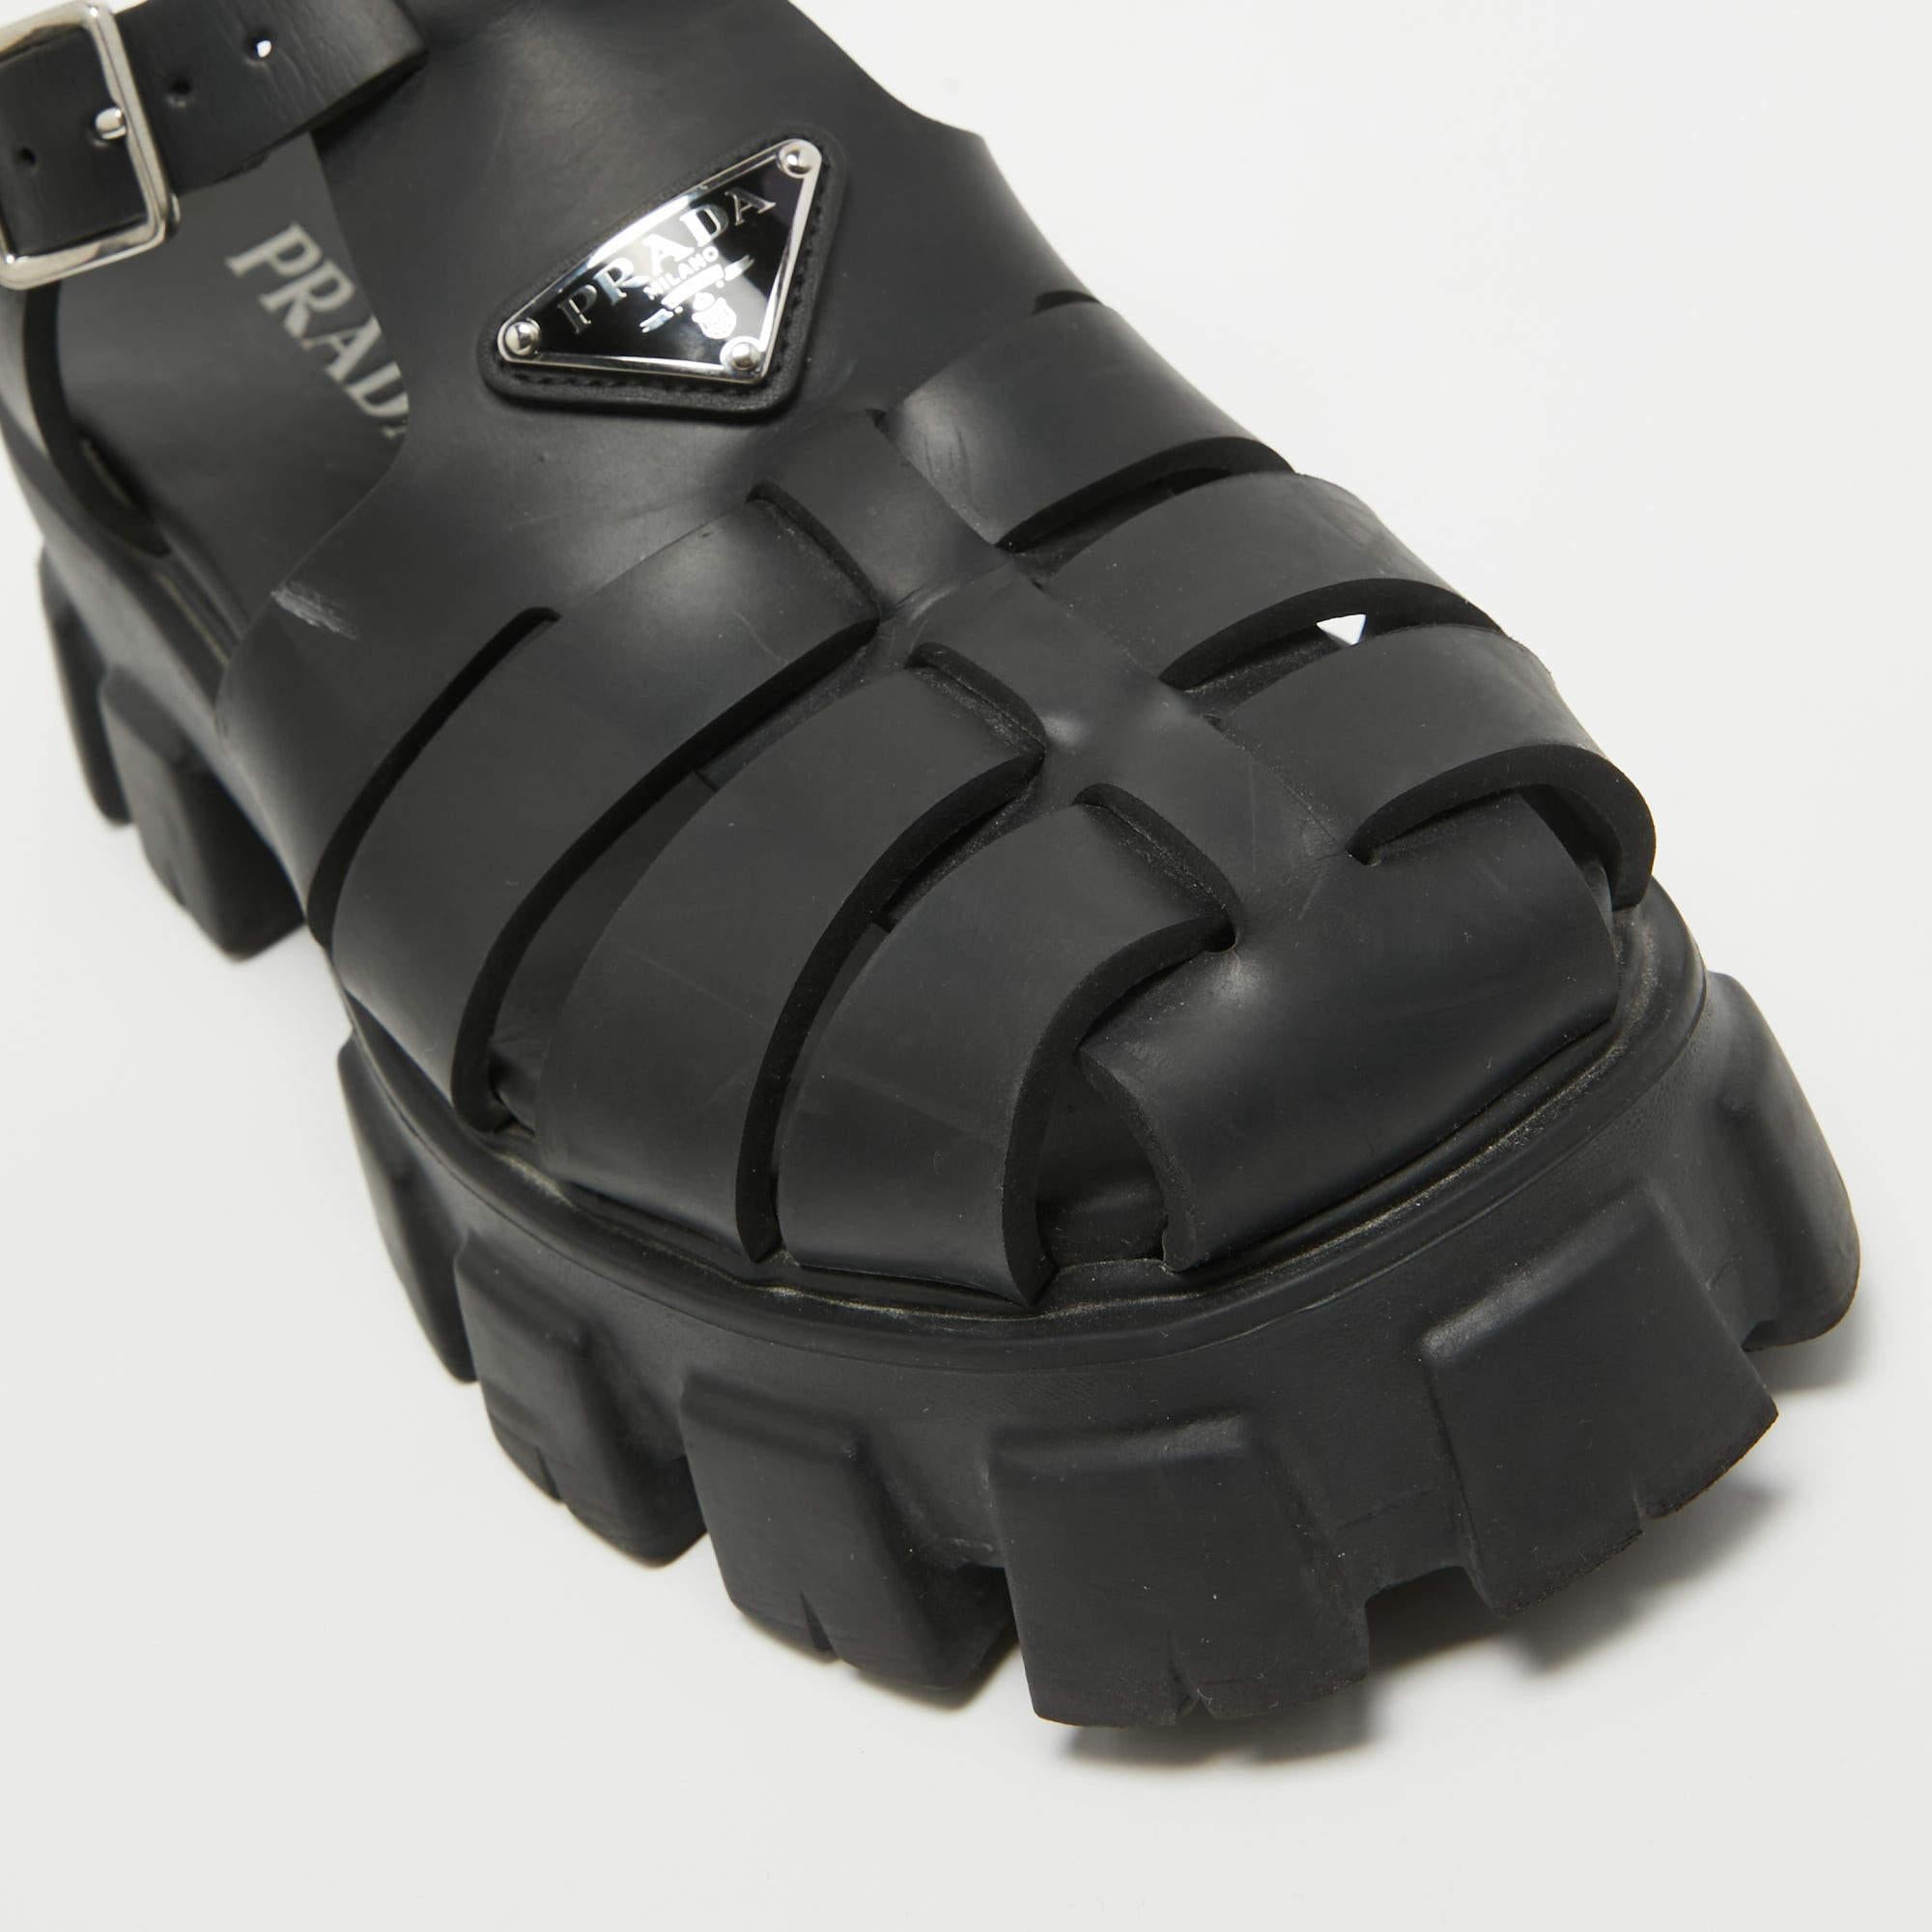 Wear these designer sandals to spruce up any outfit. They are versatile, chic, and can be easily styled. Made using quality materials, these sandals are well-built and long-lasting.

Includes: Original Dustbag